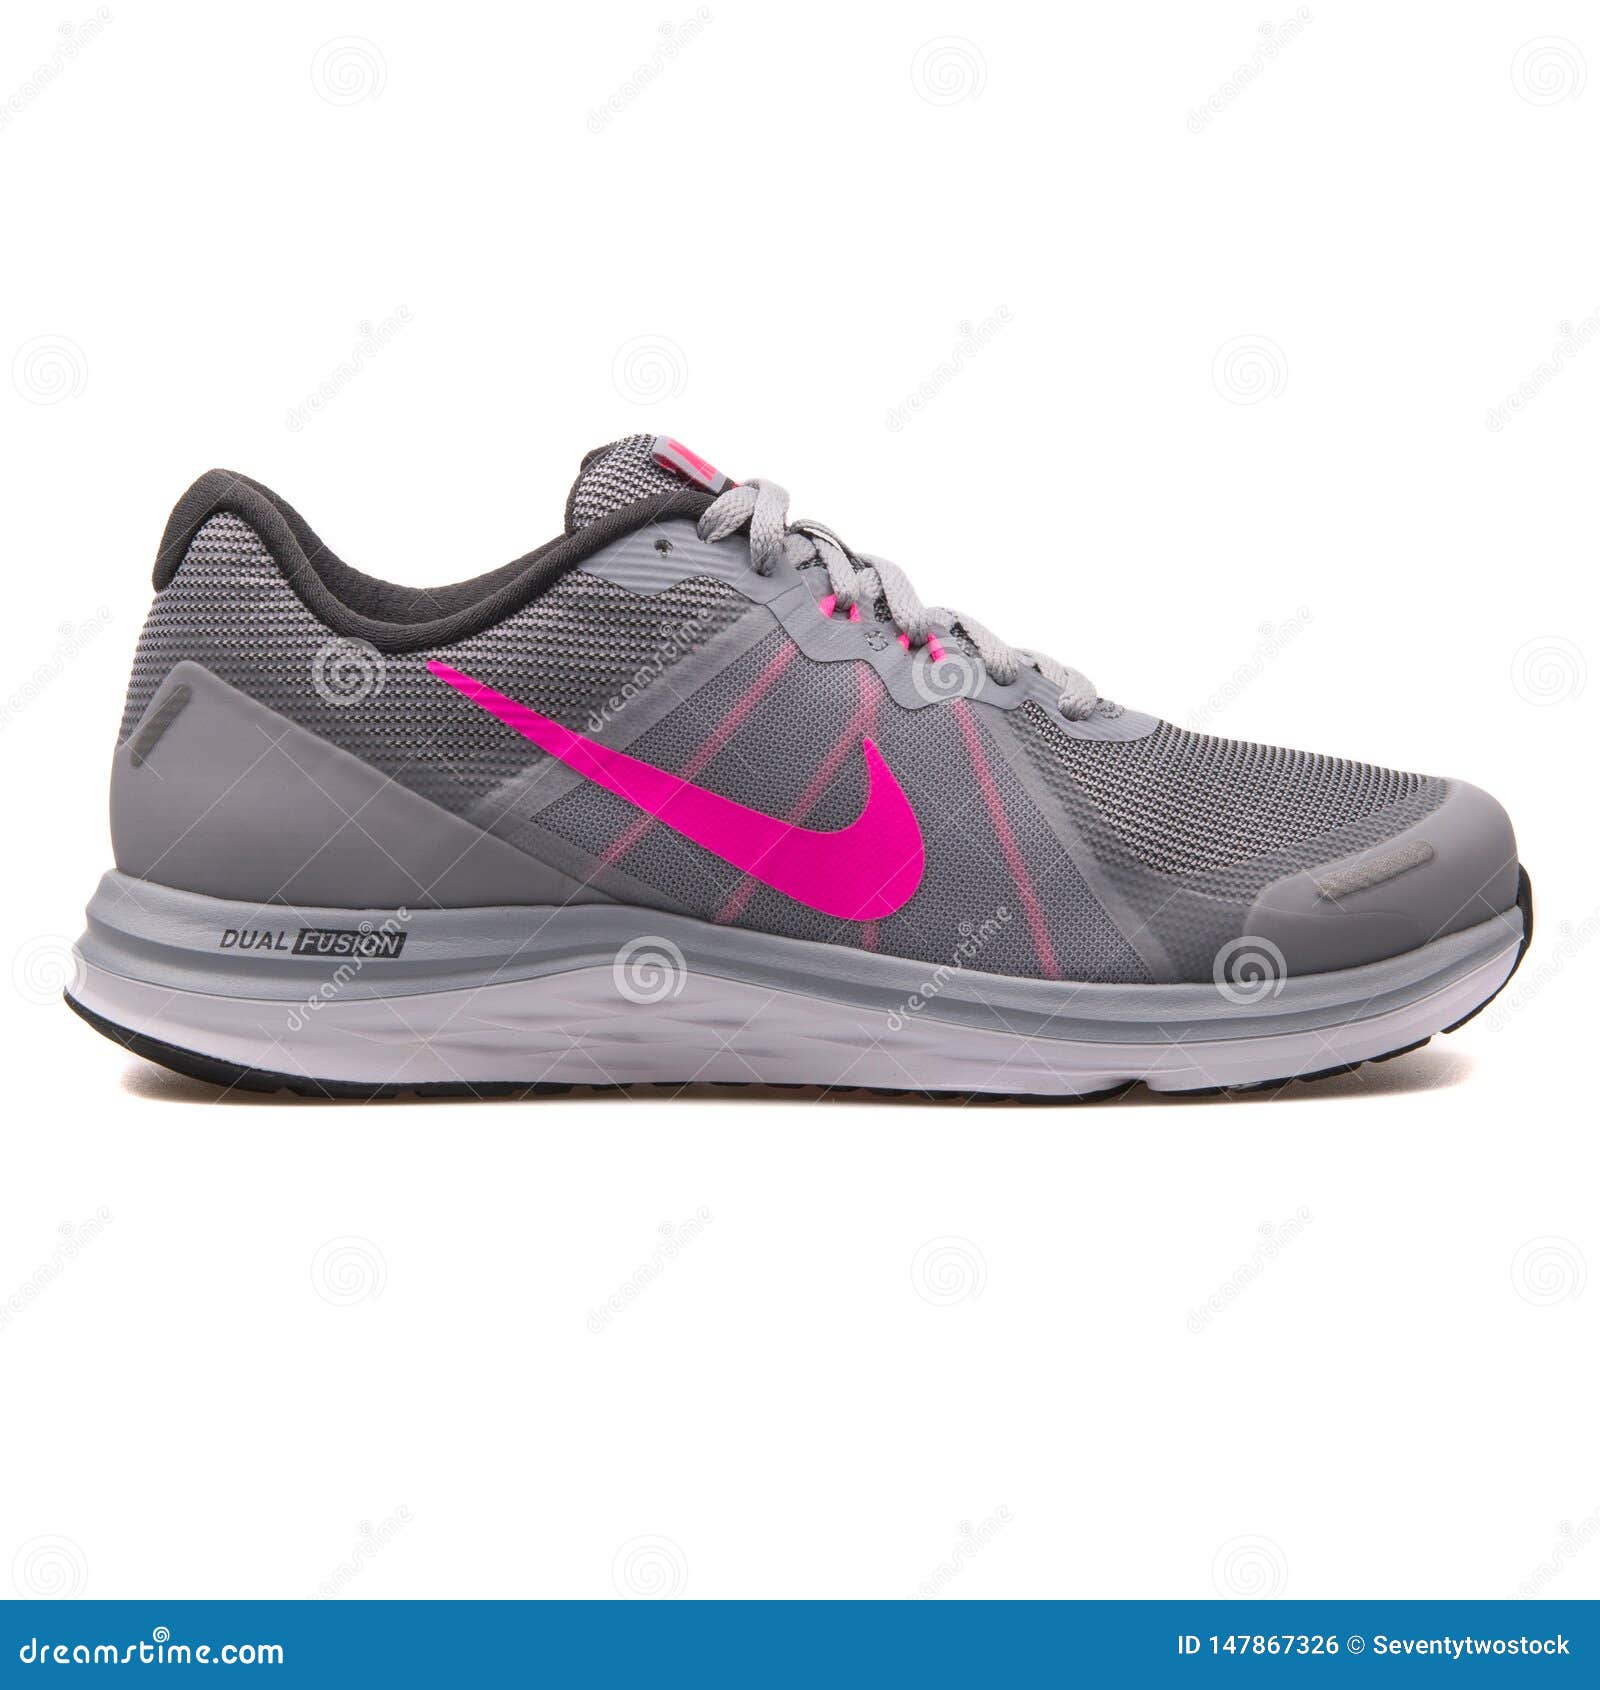 Nike Dual Fusion X 2 Grey Pink Sneaker Editorial Photo - of equipment, leather: 147867326